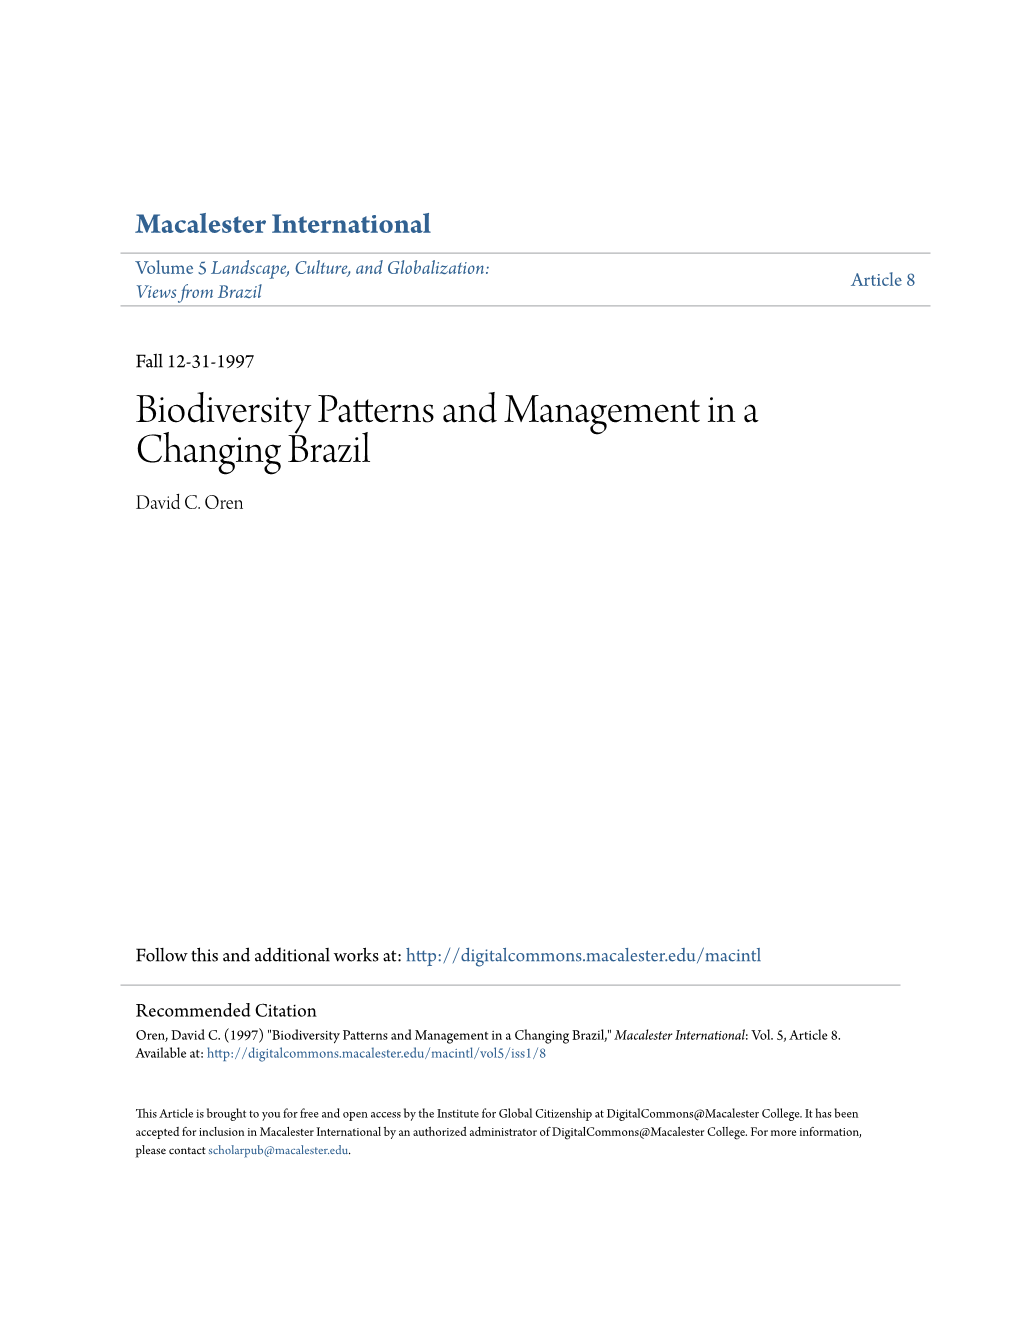 Biodiversity Patterns and Management in a Changing Brazil David C